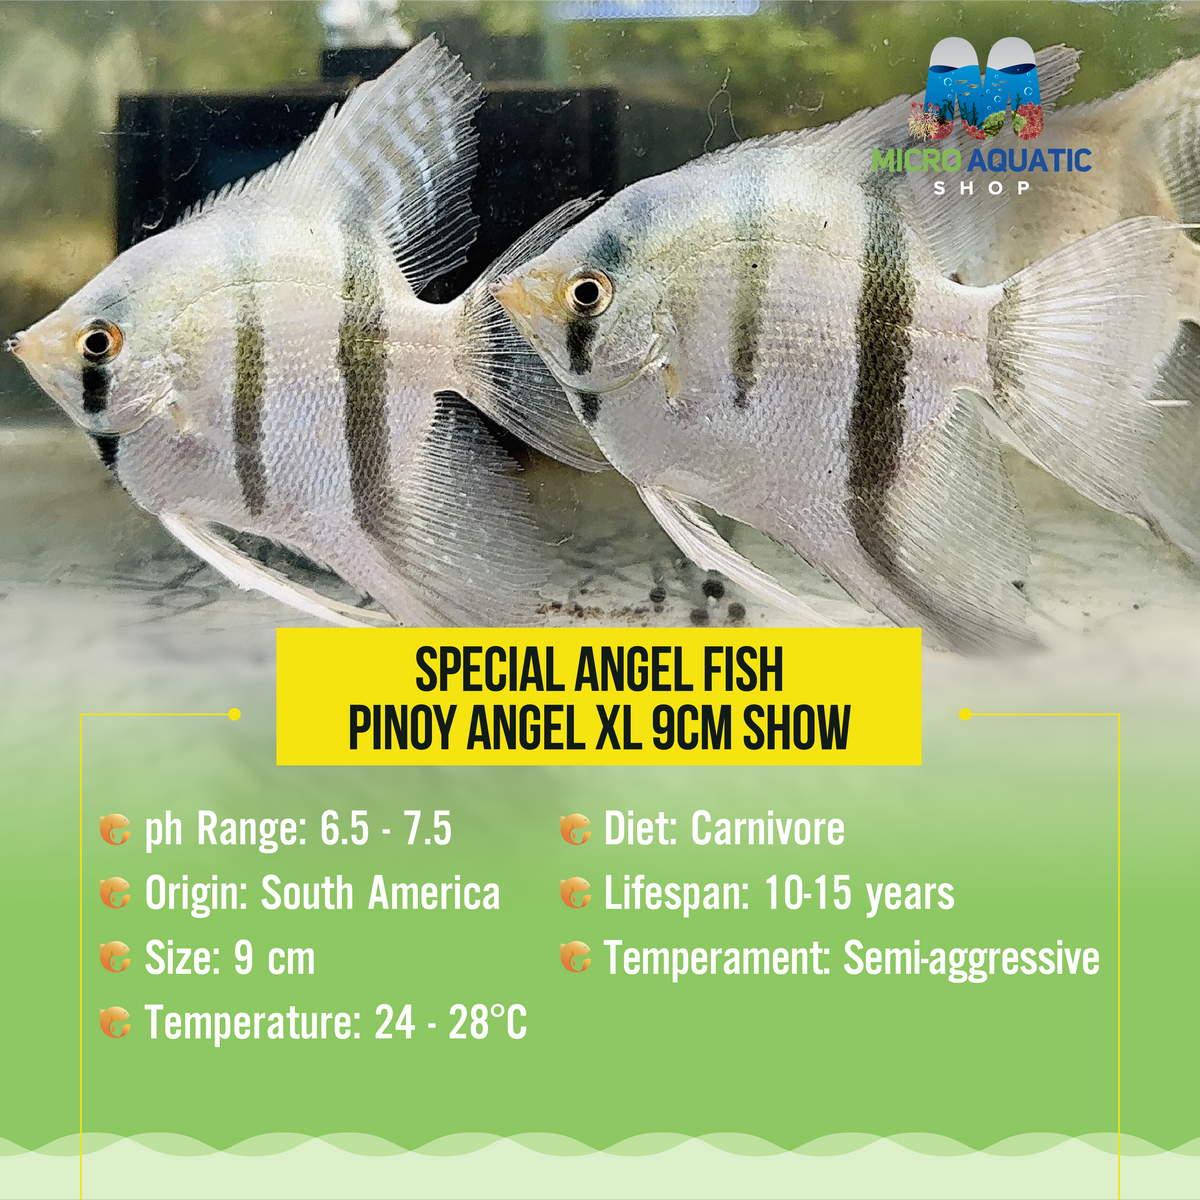 Special Angel Fish - Pinoy Angel XL 9cm Show